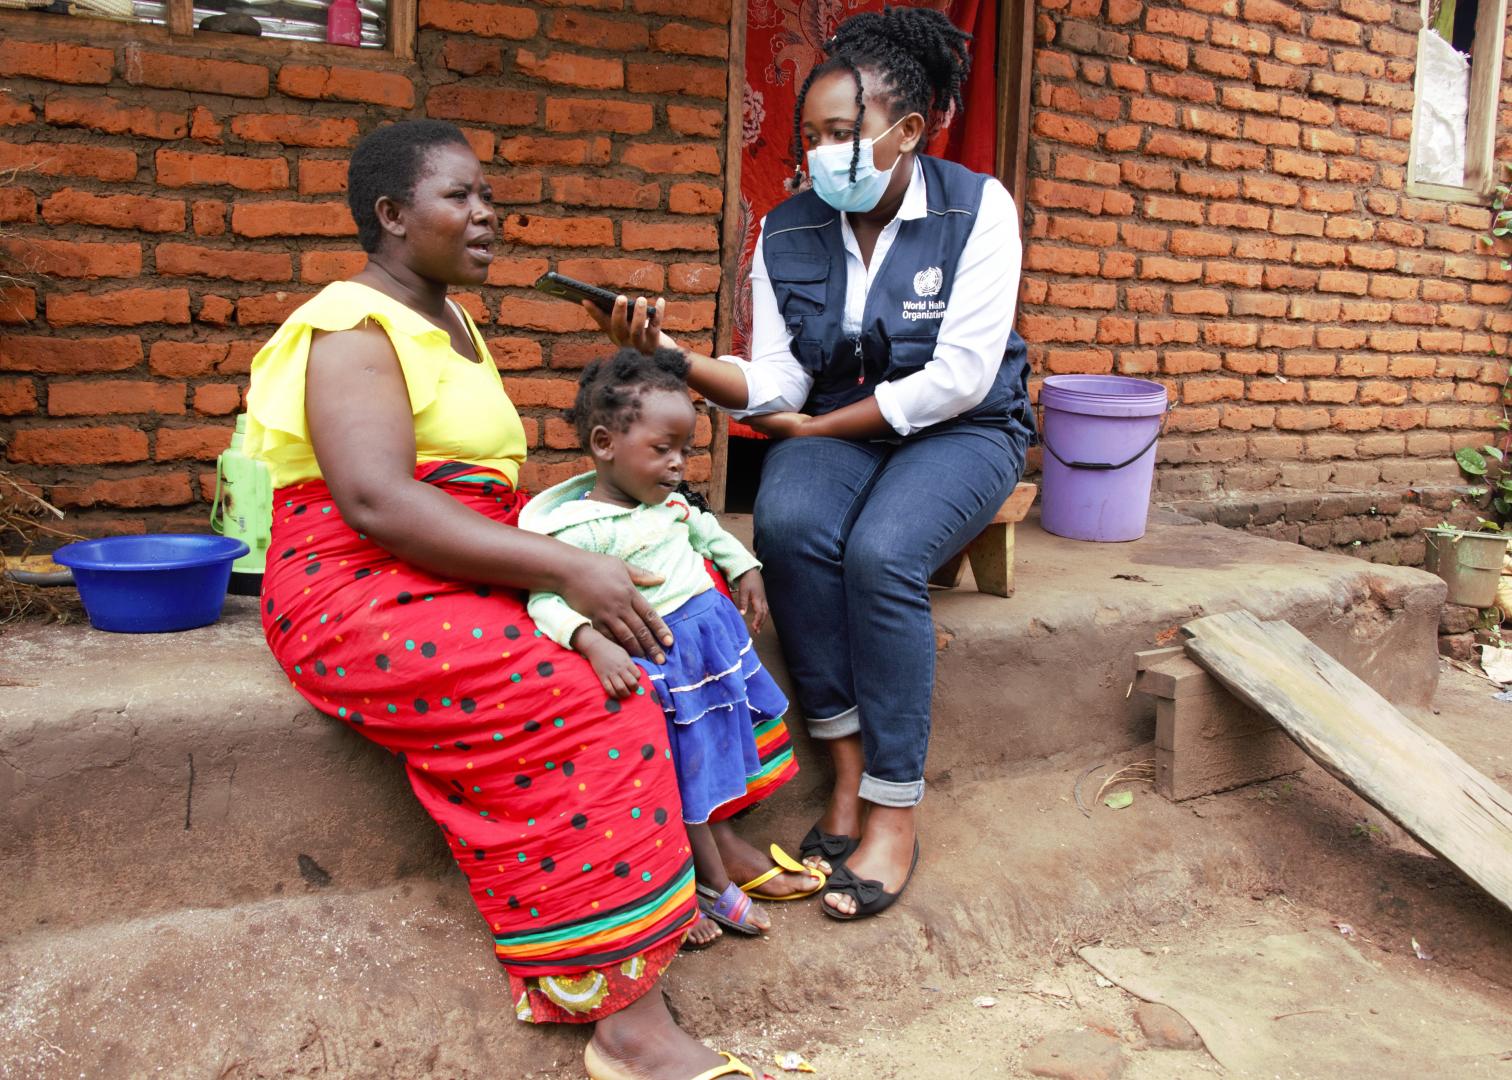 Clara Magalasi, from rural Lilongwe, Malawi, walked 4 kilometers to ensure her daughter Grace, age 22 months, received her 4th and final dose of the malaria vaccine – the 4-dose regimen provides optimal malaria prevention benefits as a complementary malaria control tool.